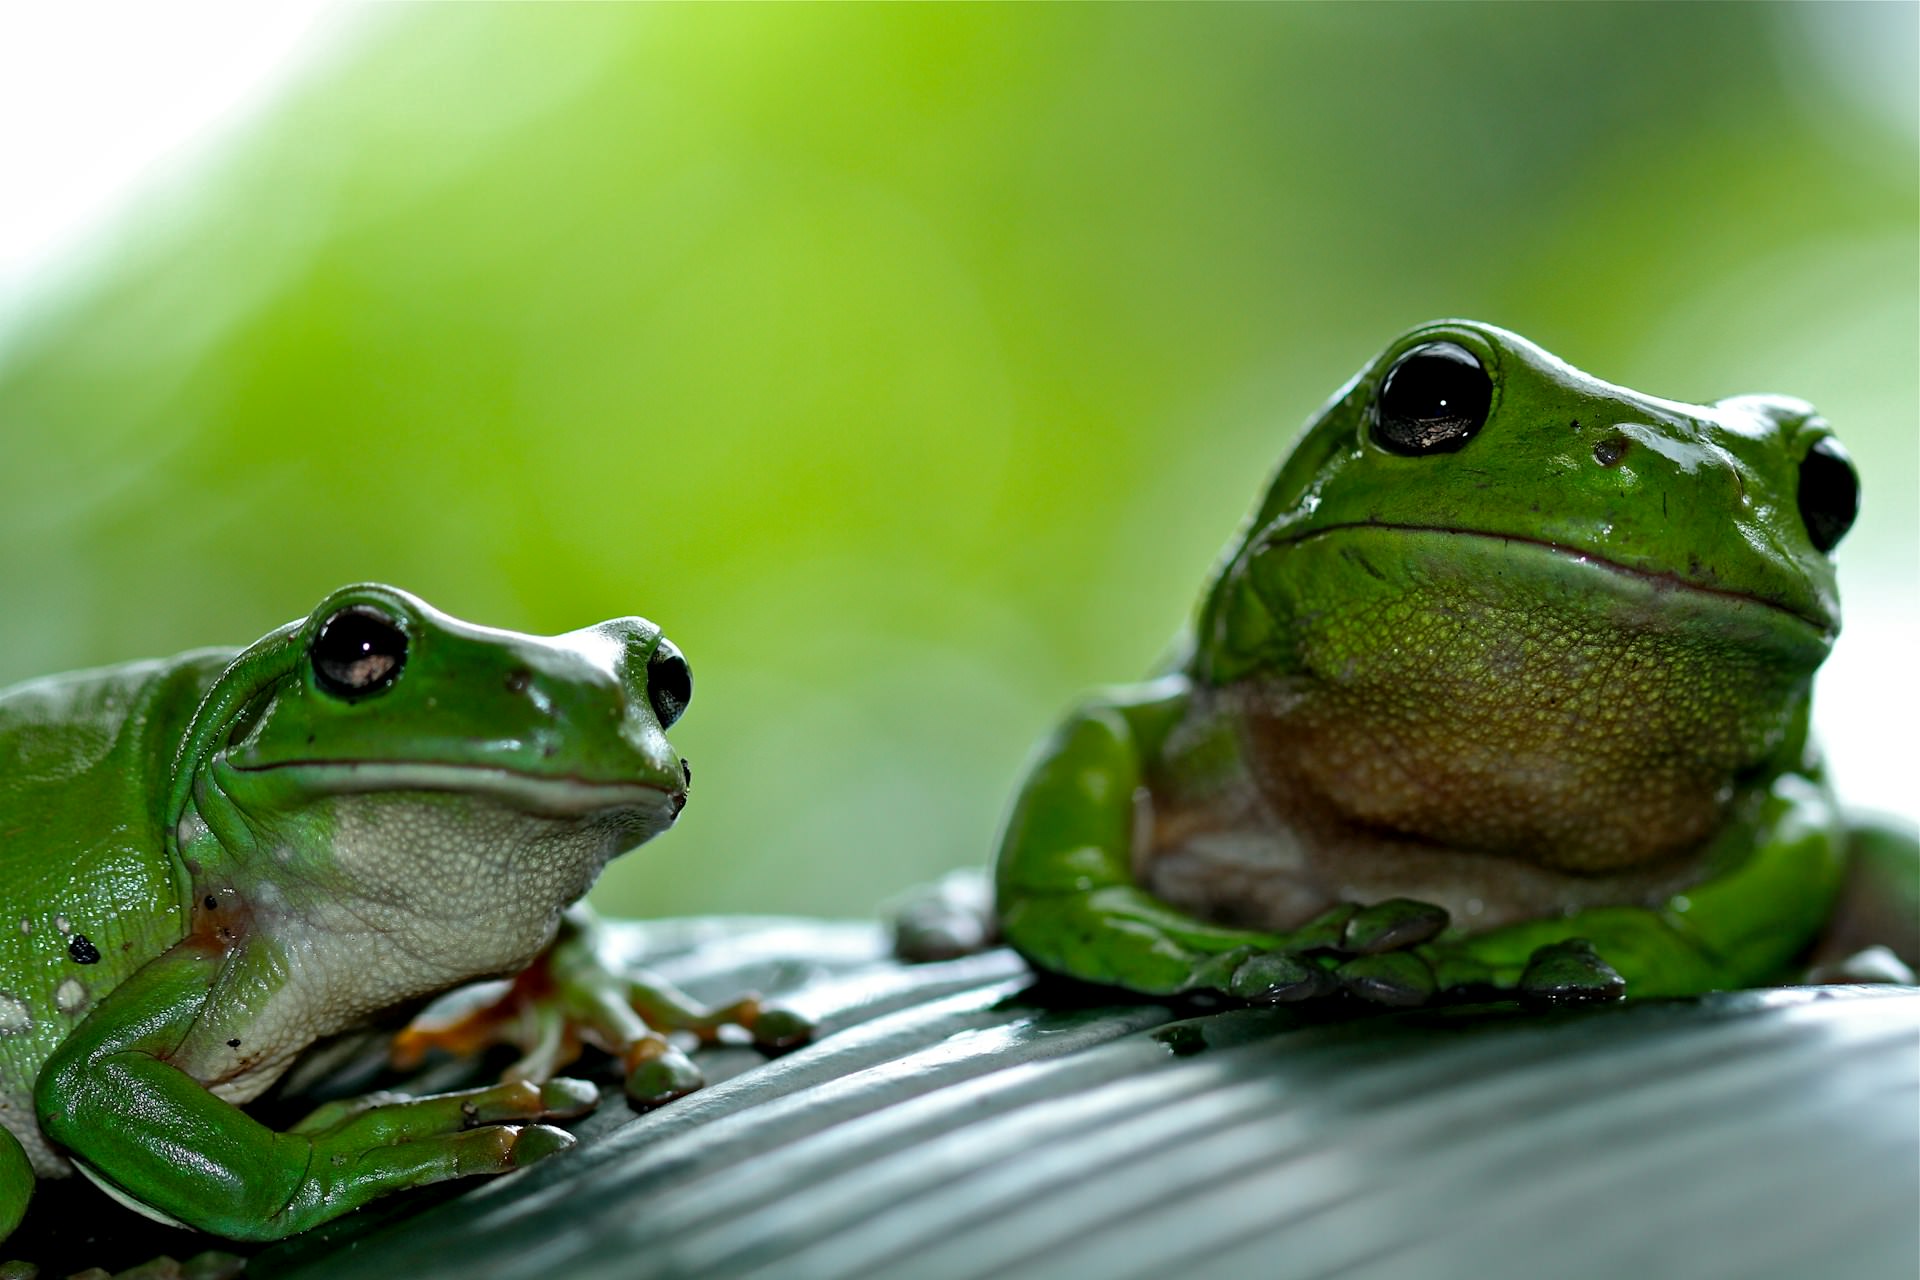 A group of frogs is collectively known as an "army." This term likely originated from the sight of countless frogs gathering together during mating season, resembling a miniature military formation.